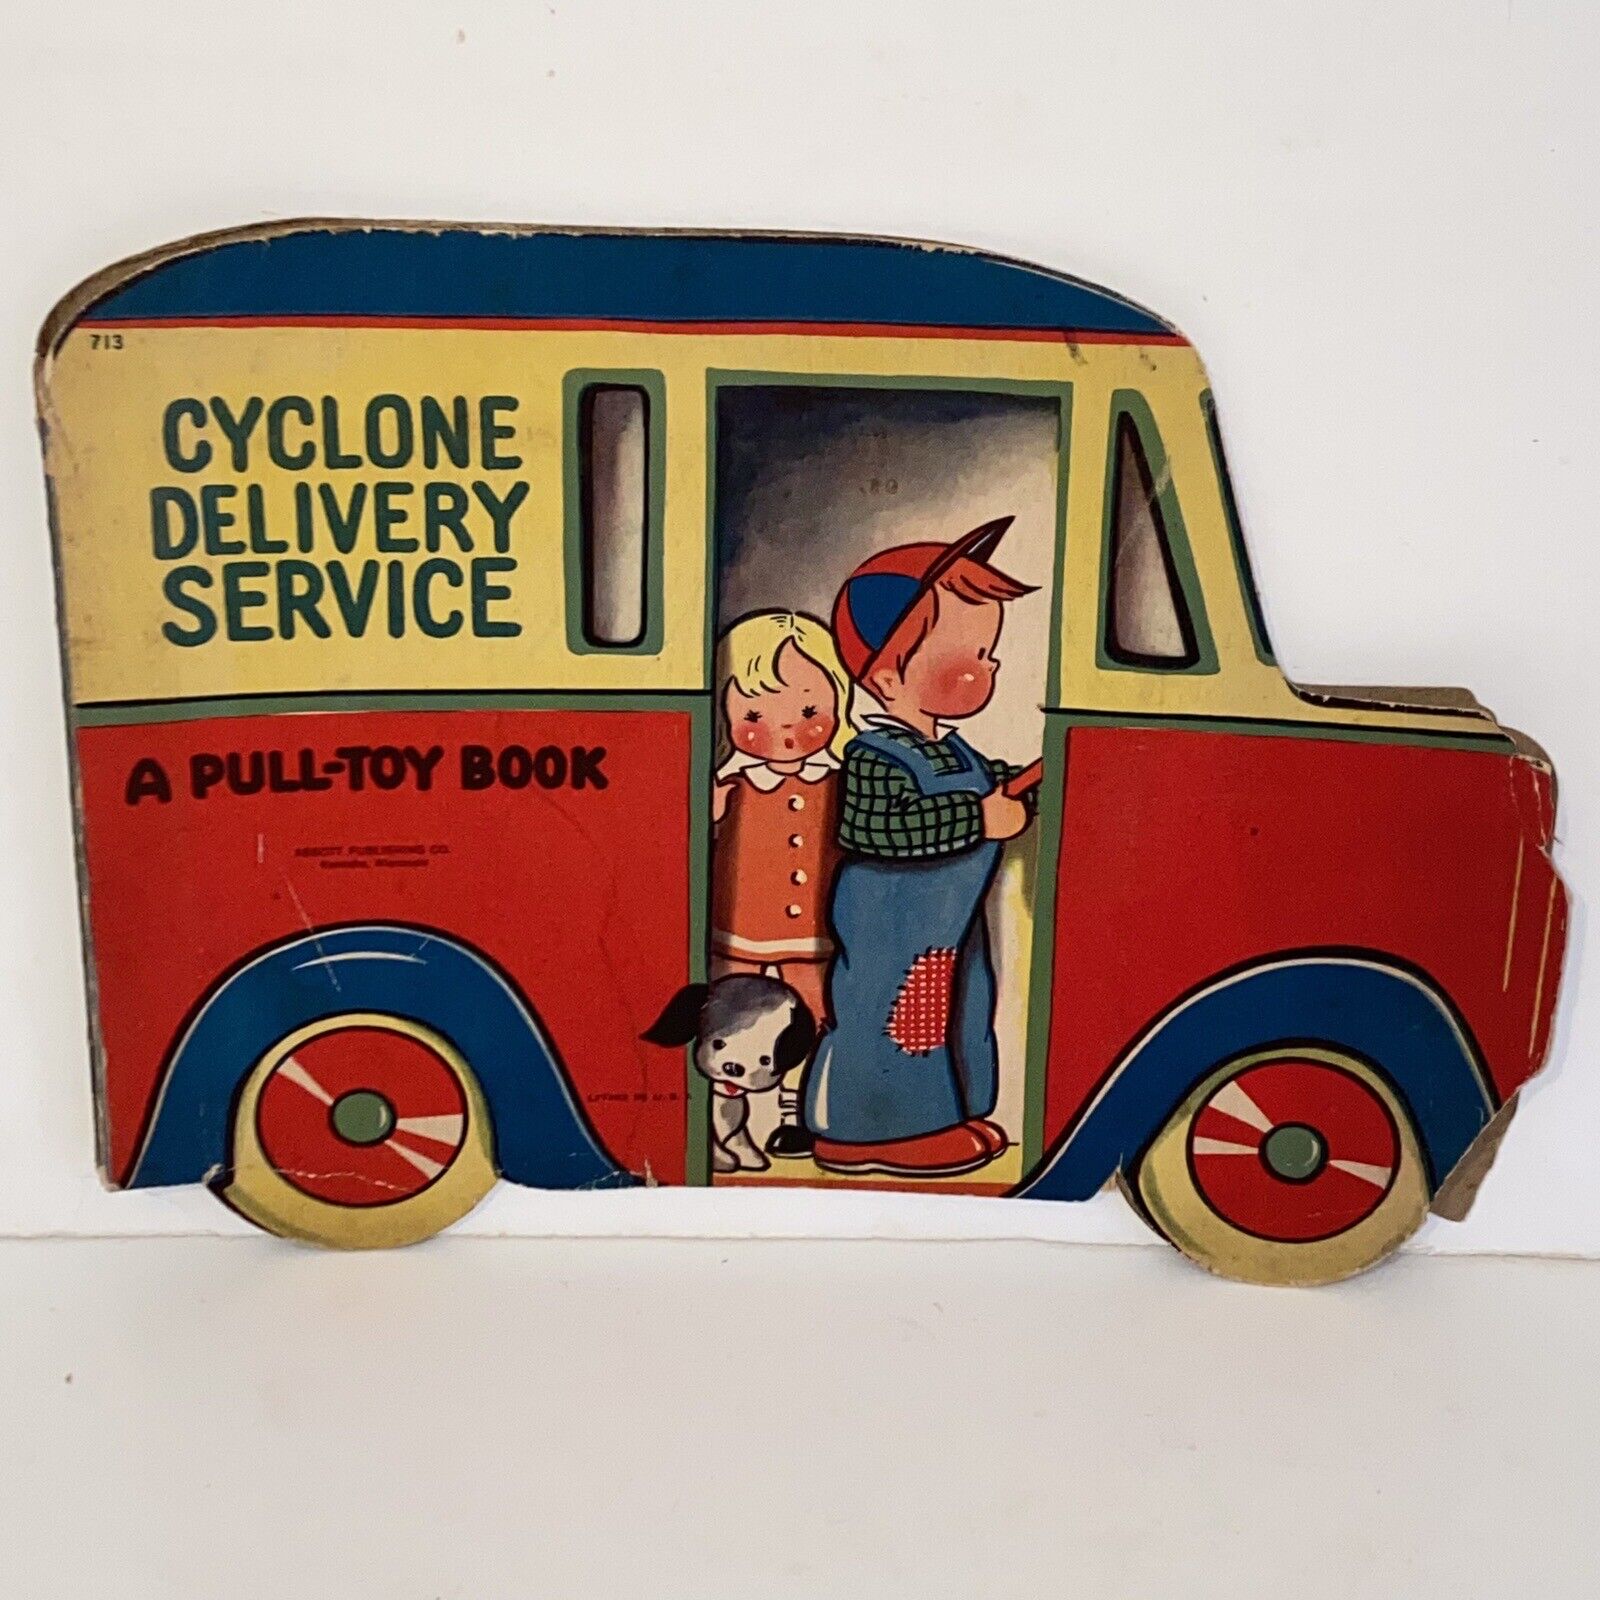 Vintage 1944 Cyclone Delivery Service A Pull Toy Book #713 Full Color